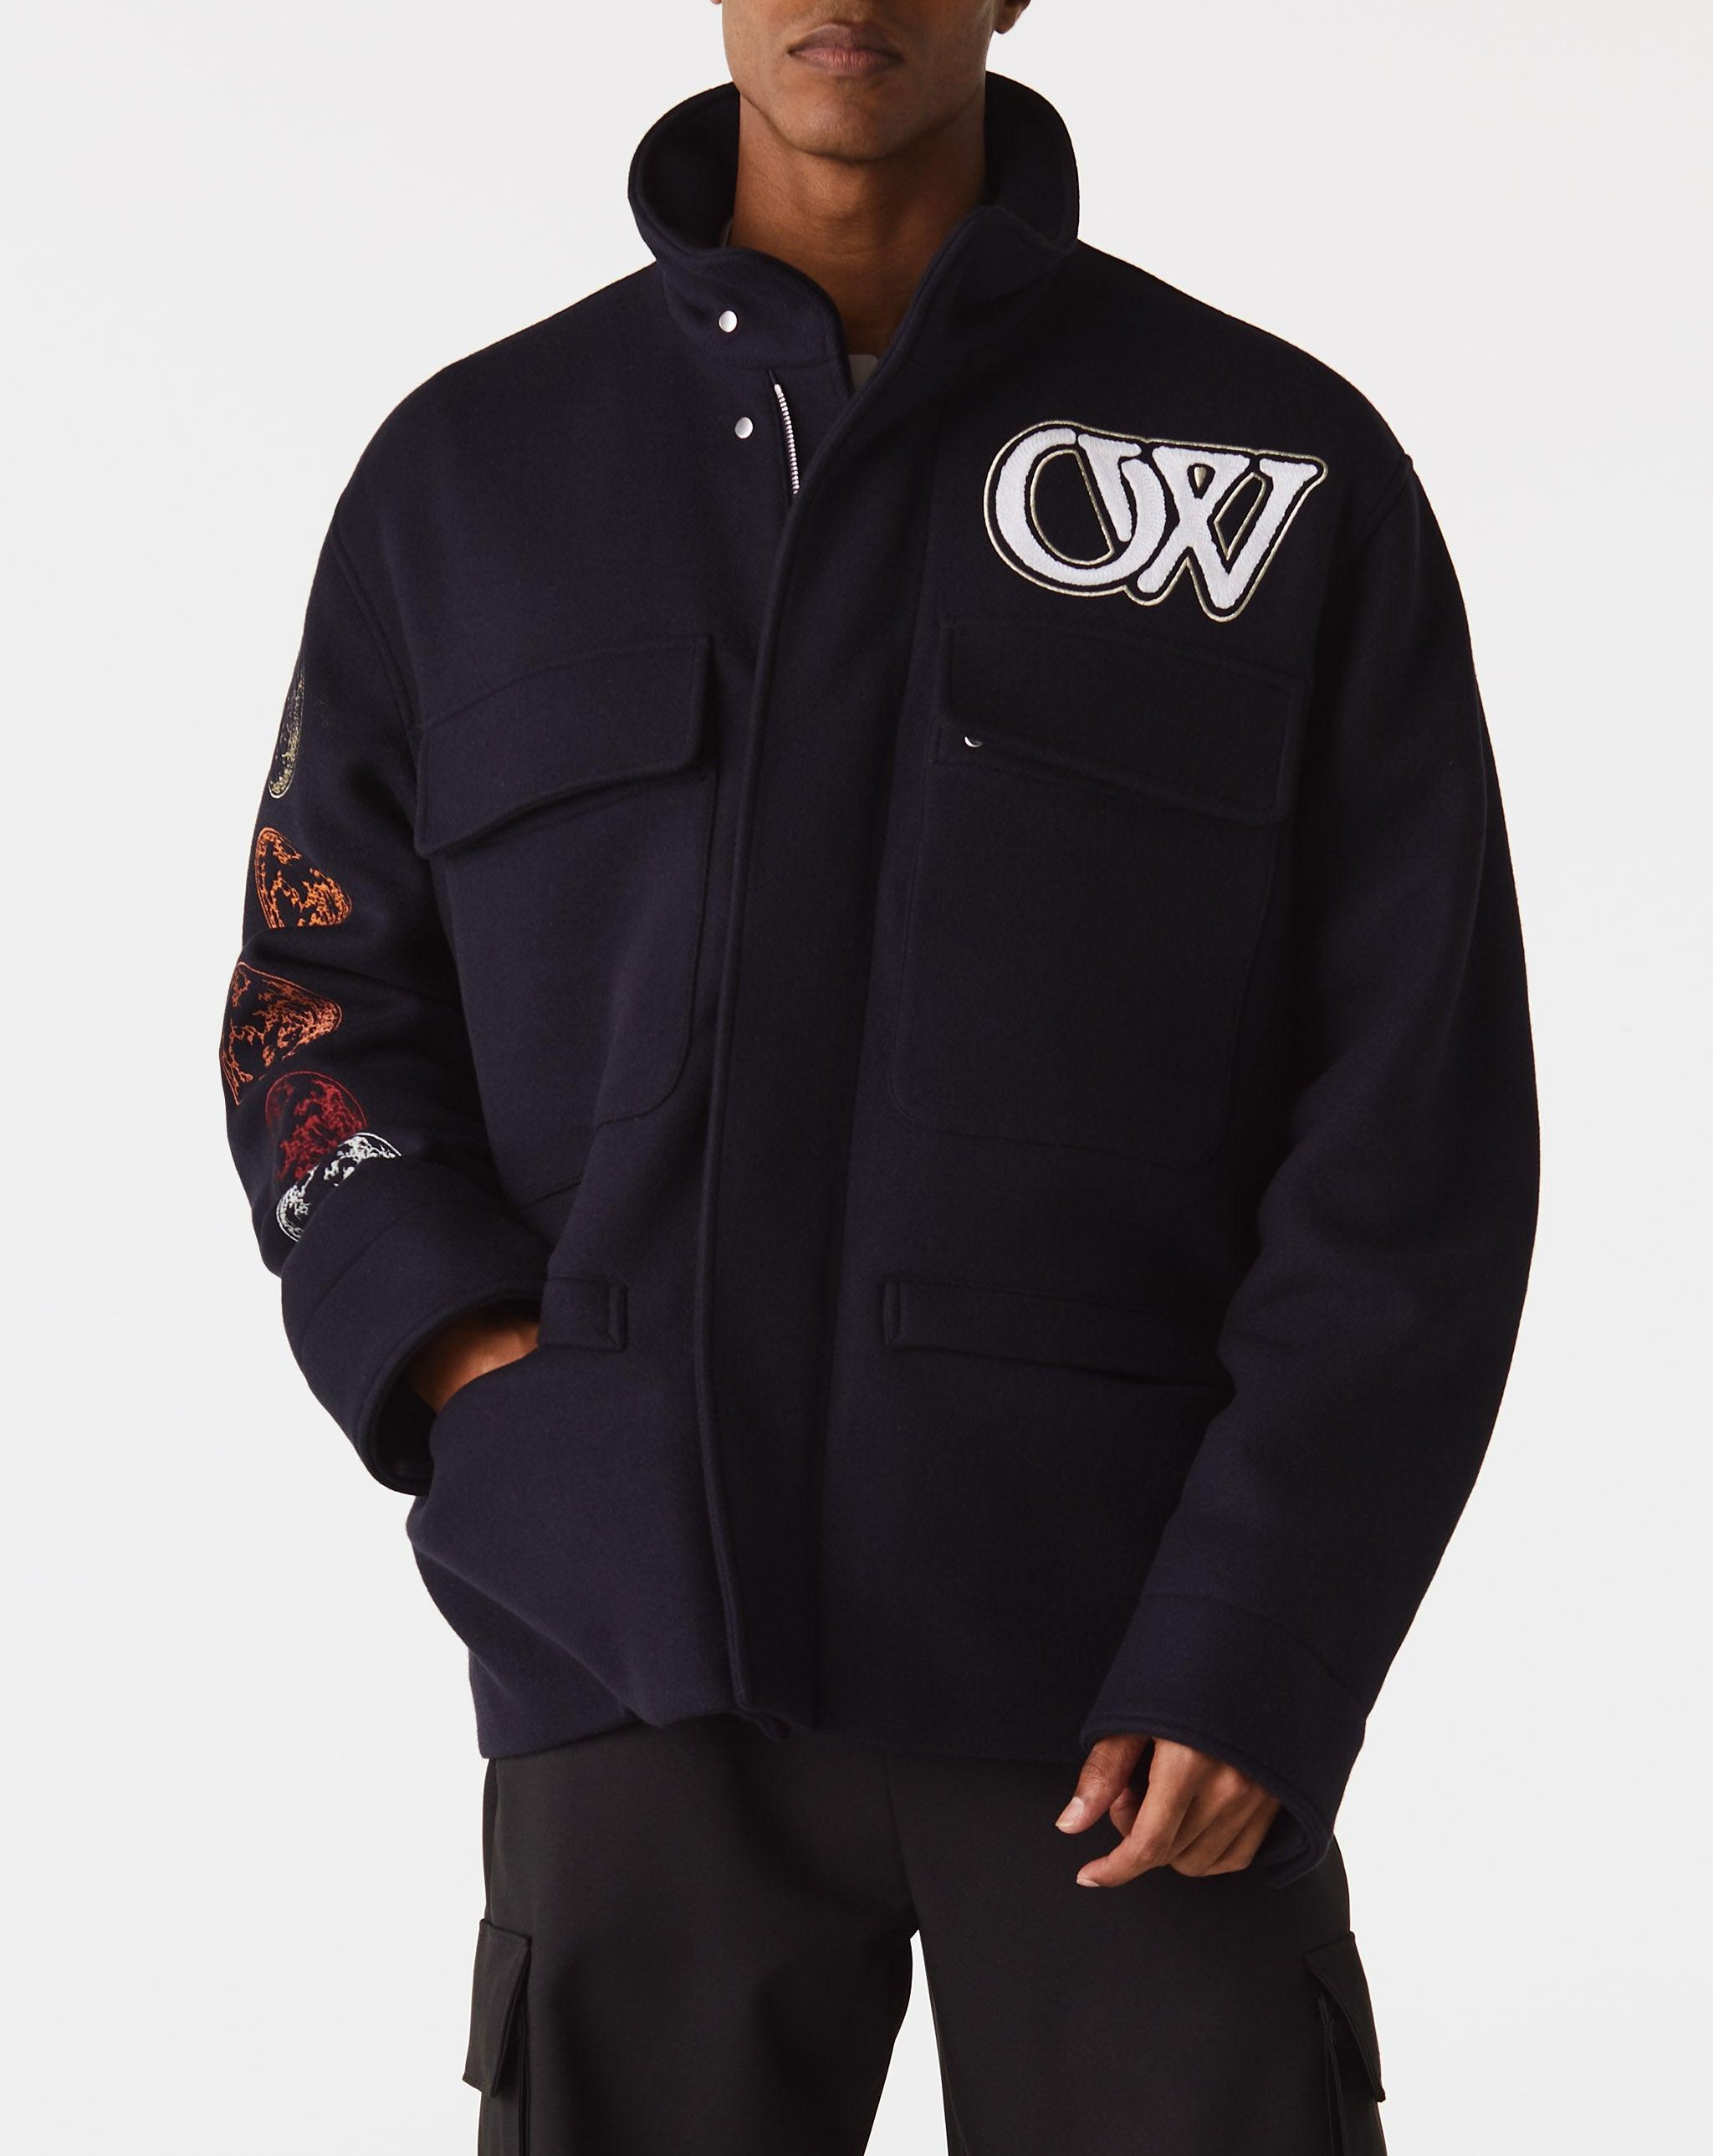 Off-White c/o Virgil Abloh Moon Phase Field Jacket in Black for